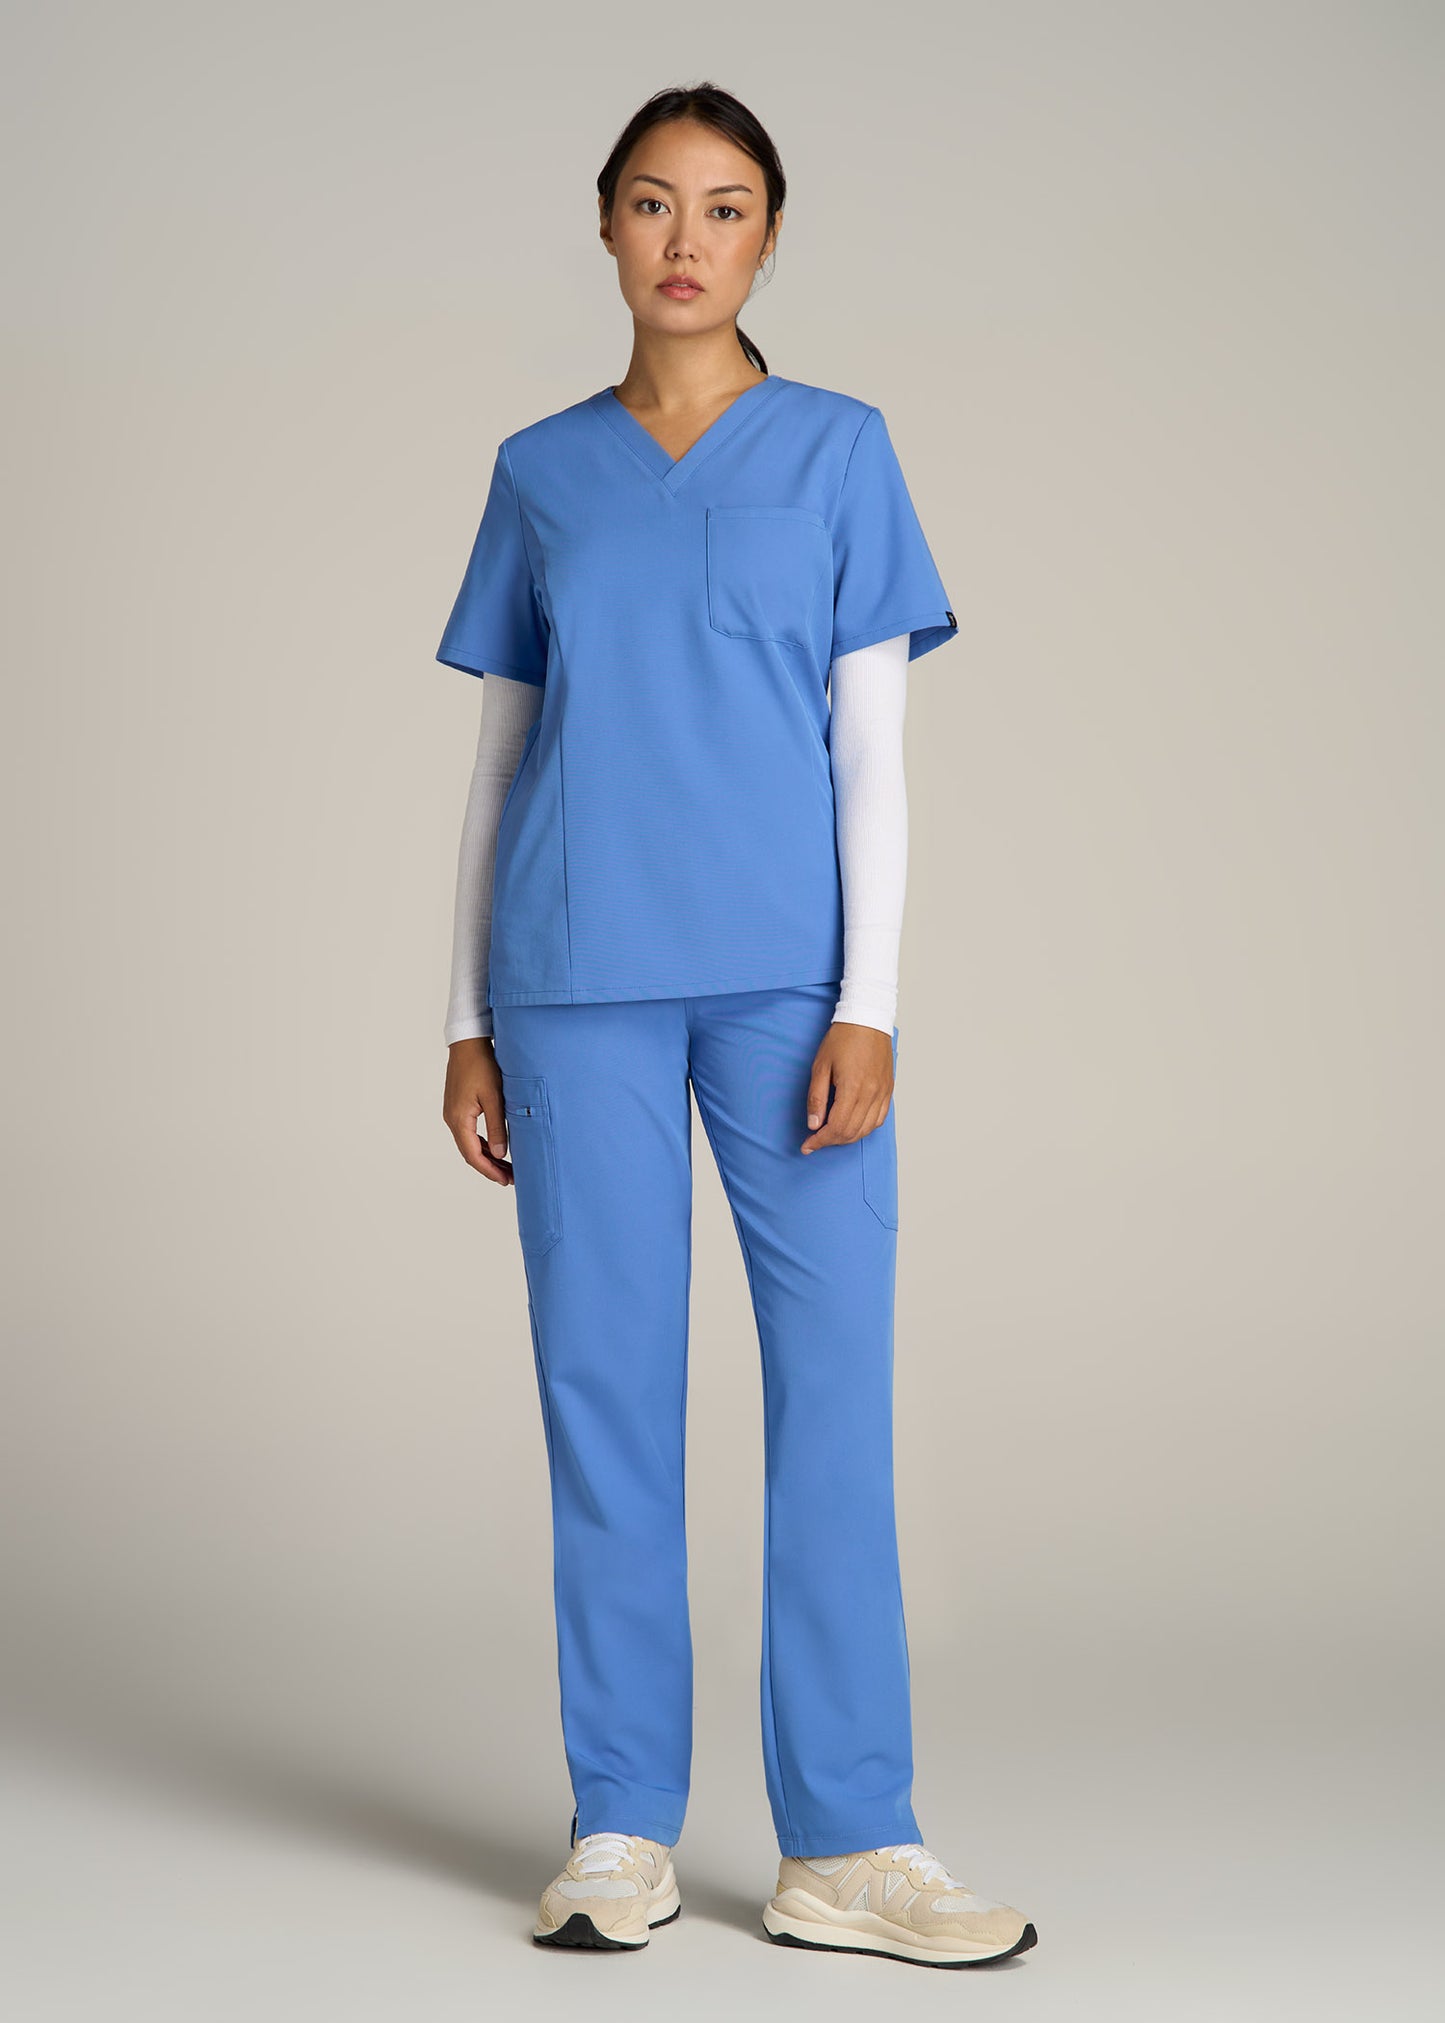 Secret Pockets? The Perfect Addition to Medical Scrubs - Blue Sky